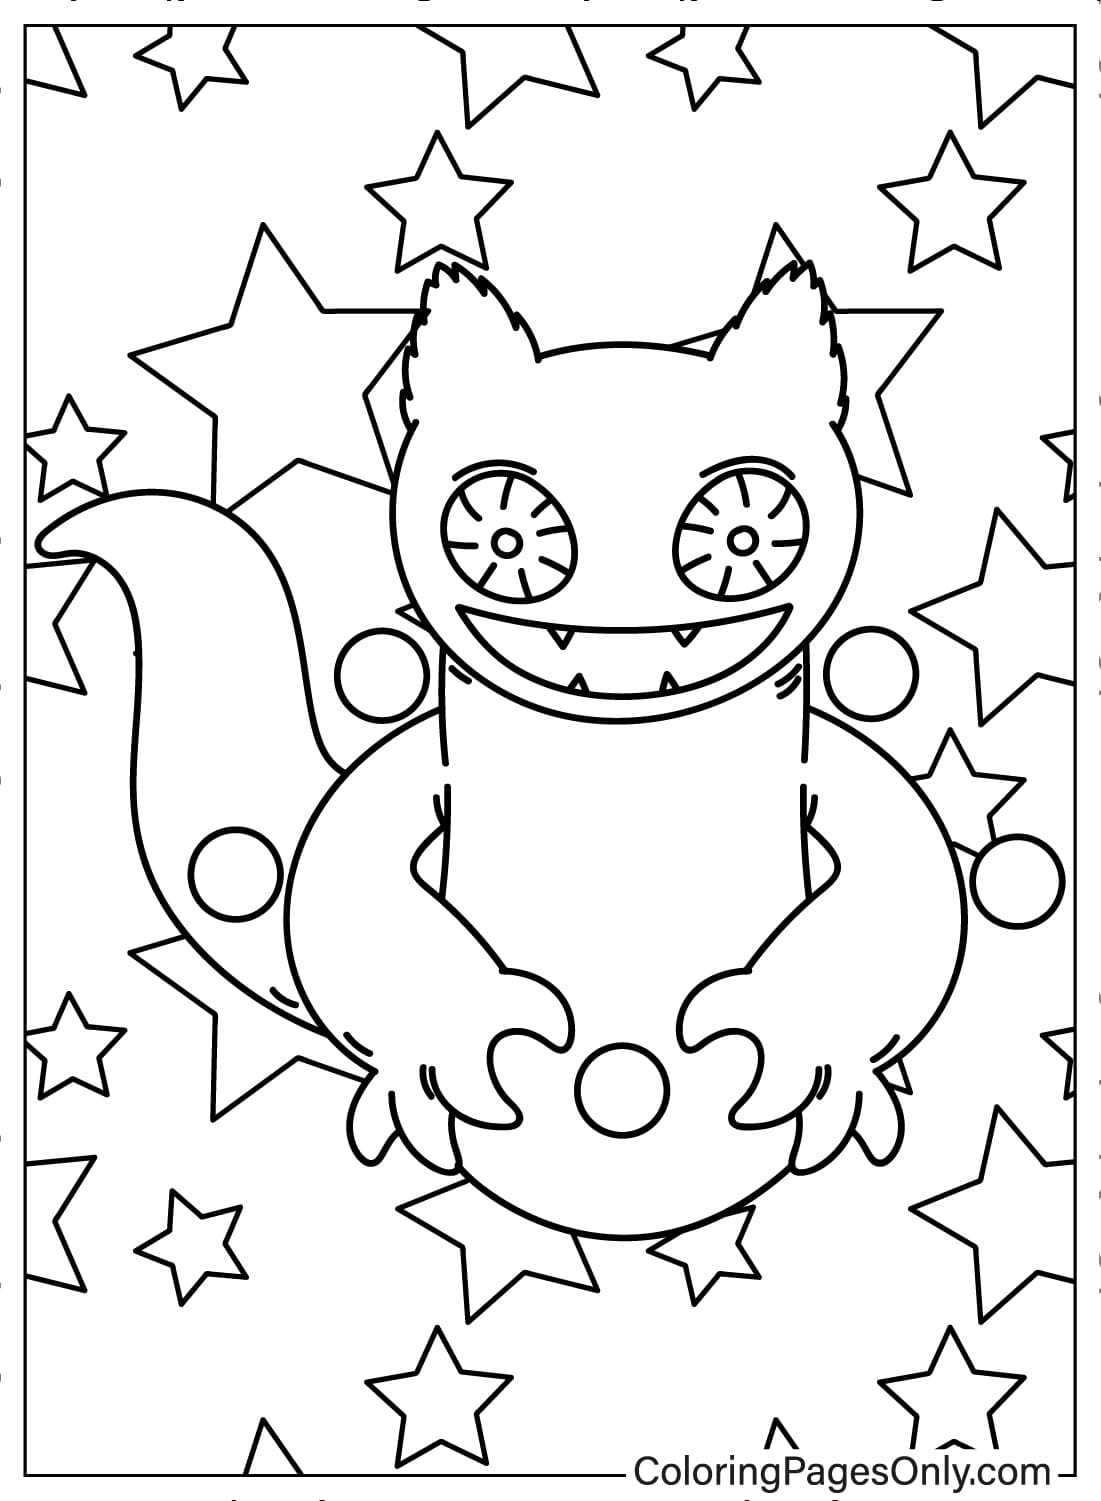 Ghazt Coloring Page Printable from Ghazt